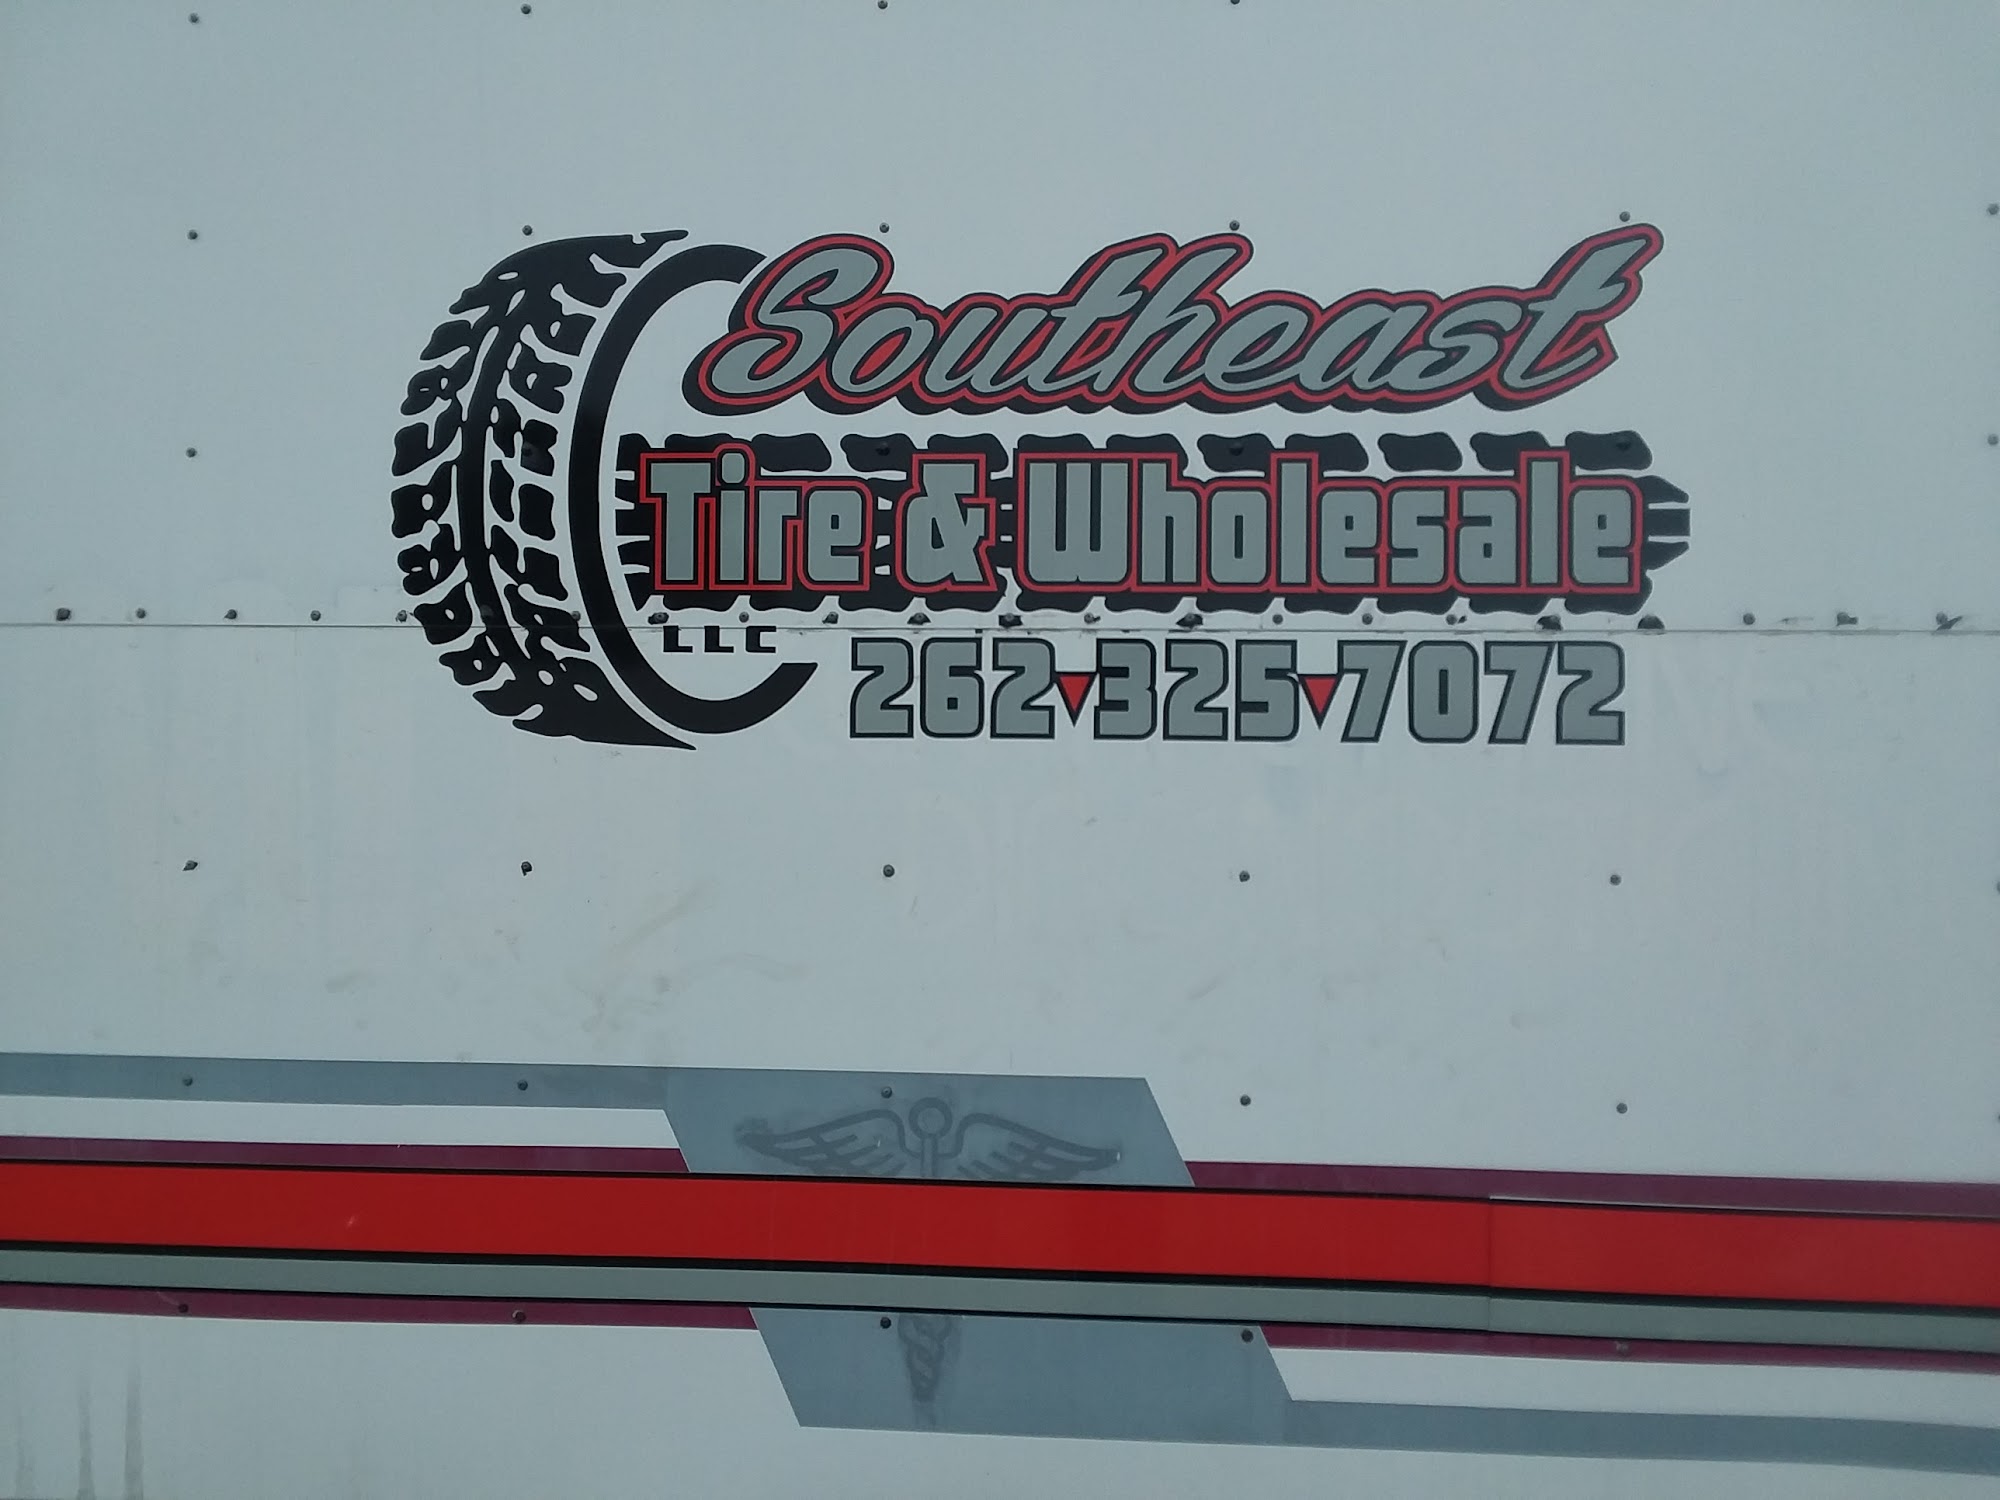 Southeast Tire and Wholesale LLC